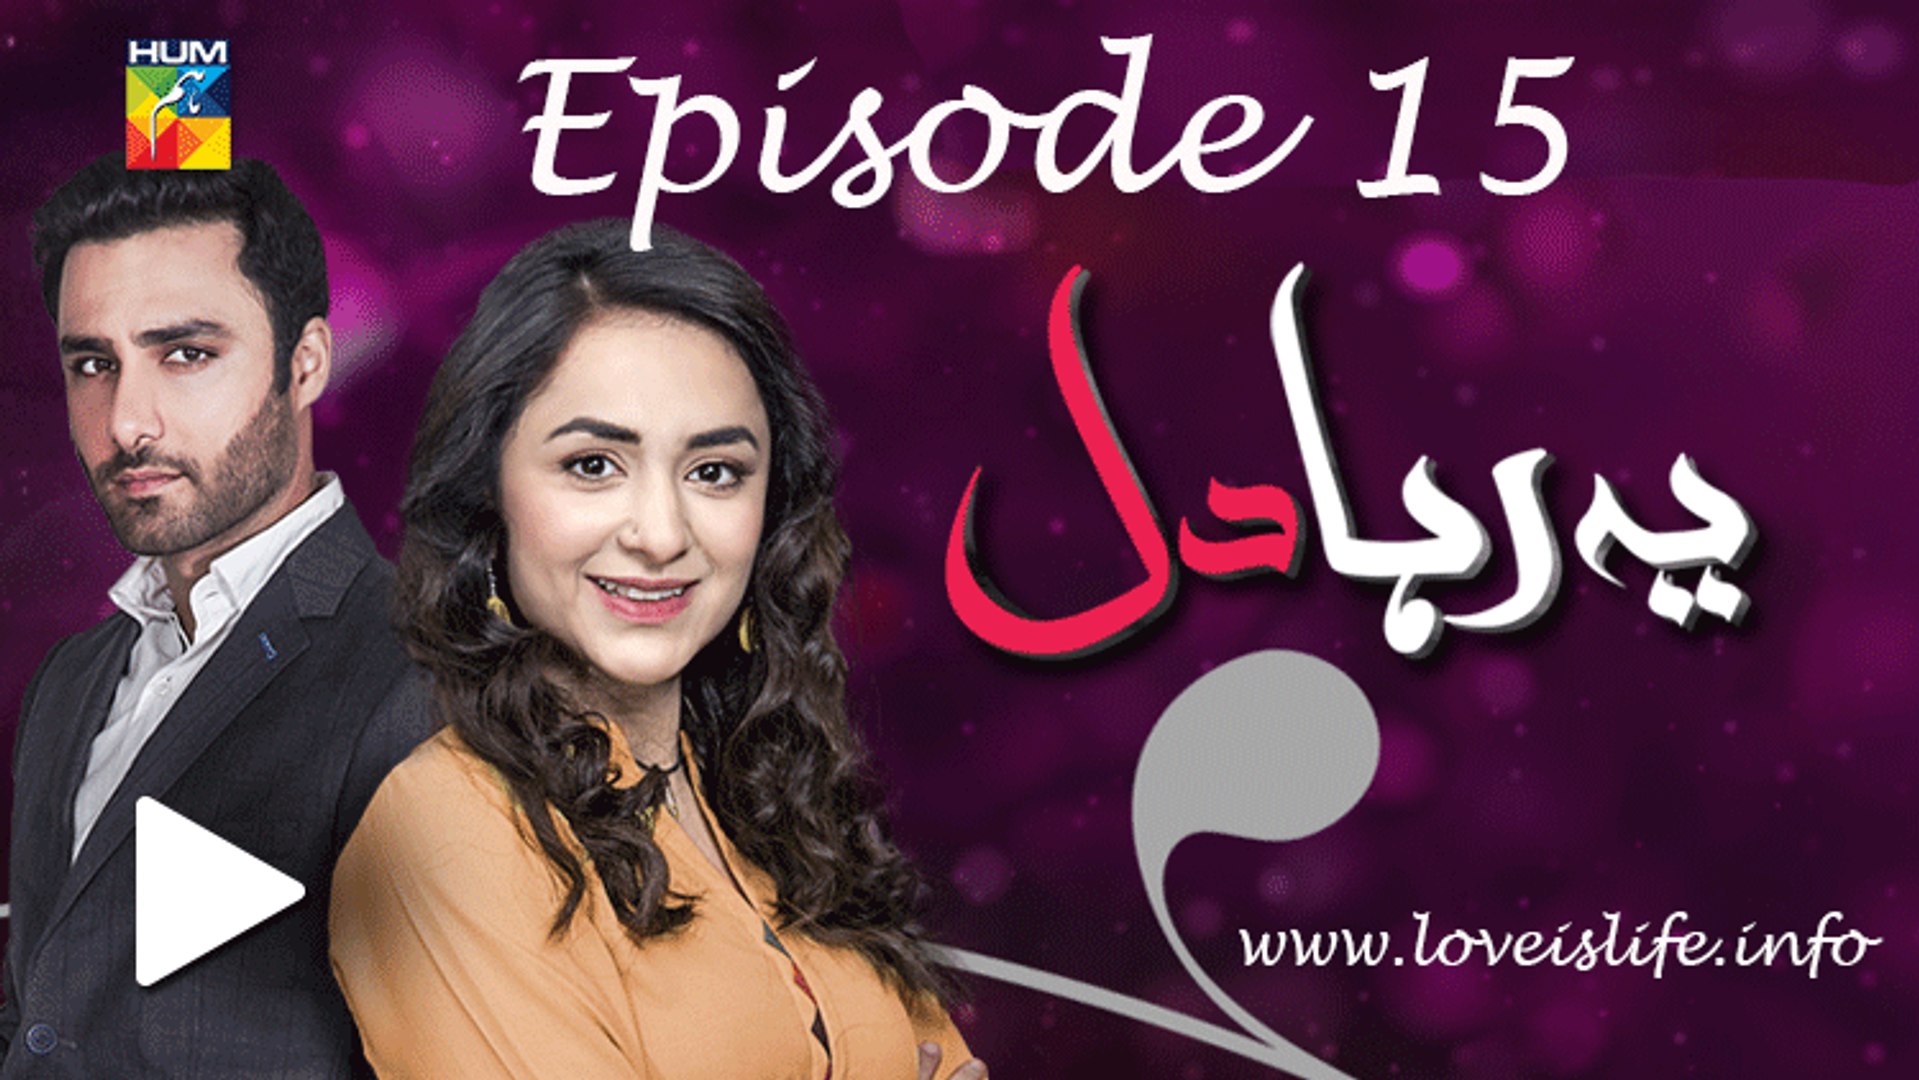 Yeh raha dil episode 15